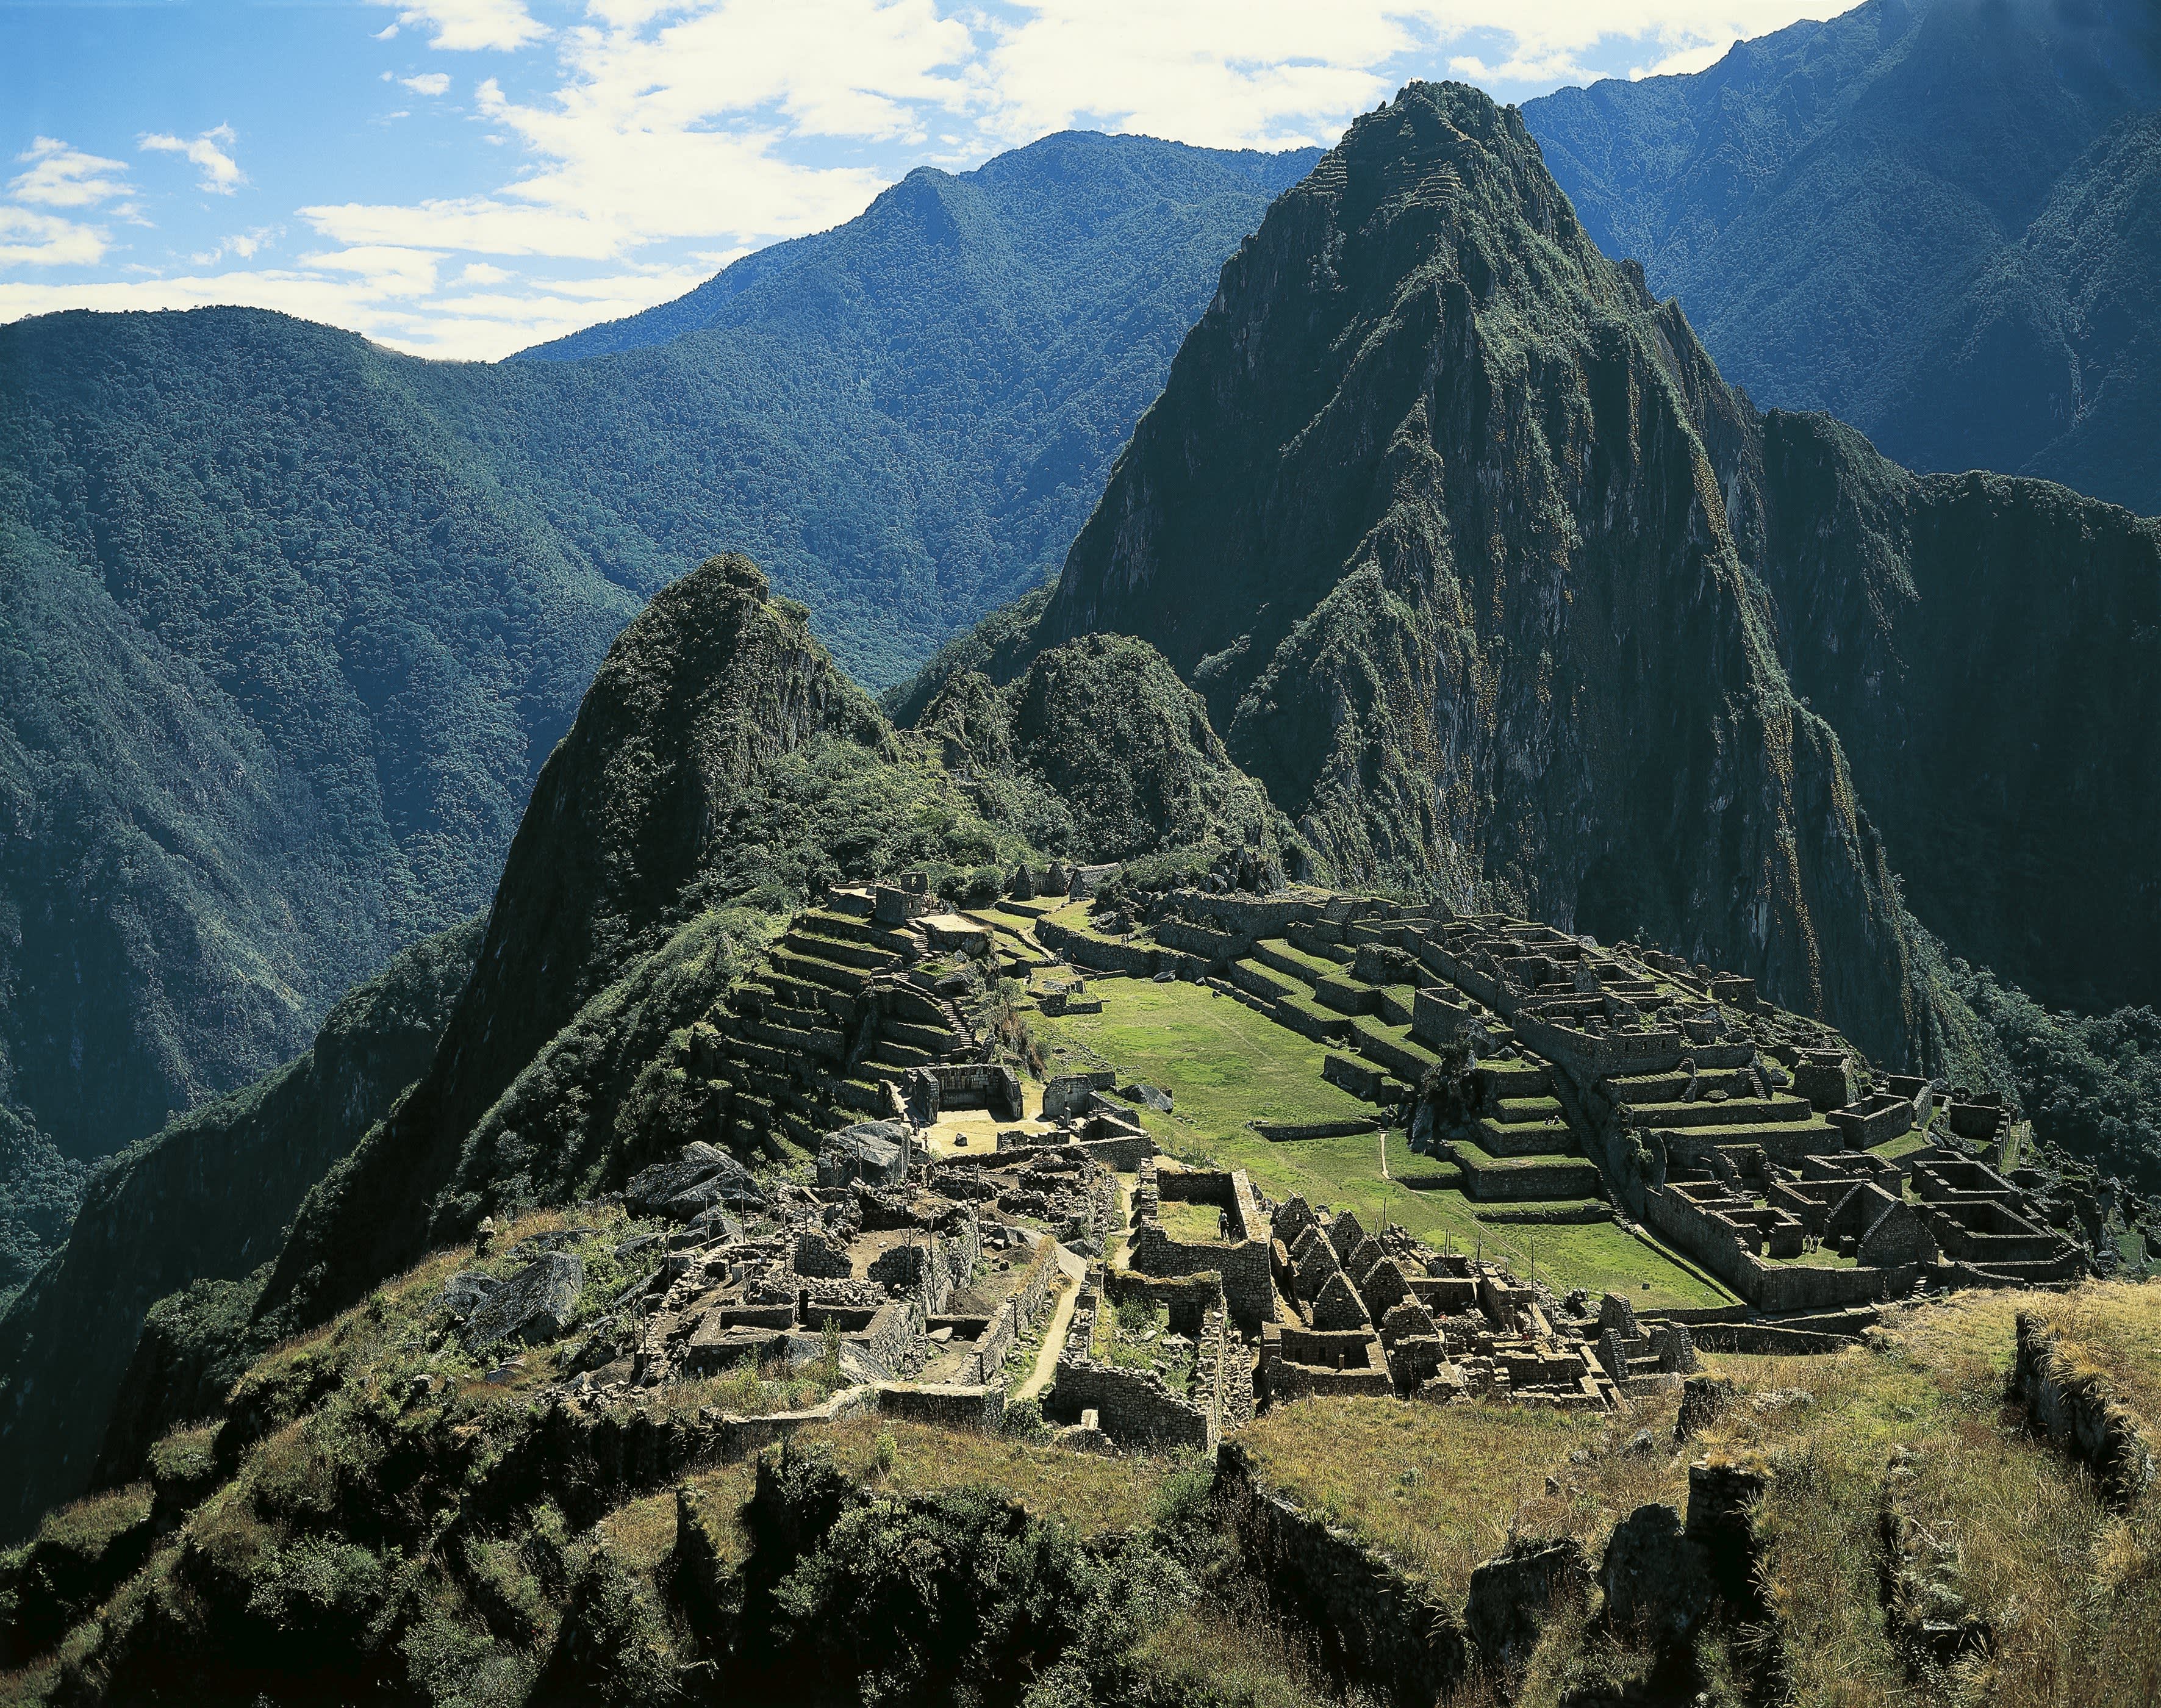 What to know about planning a trip to Machu Picchu after the pandemic